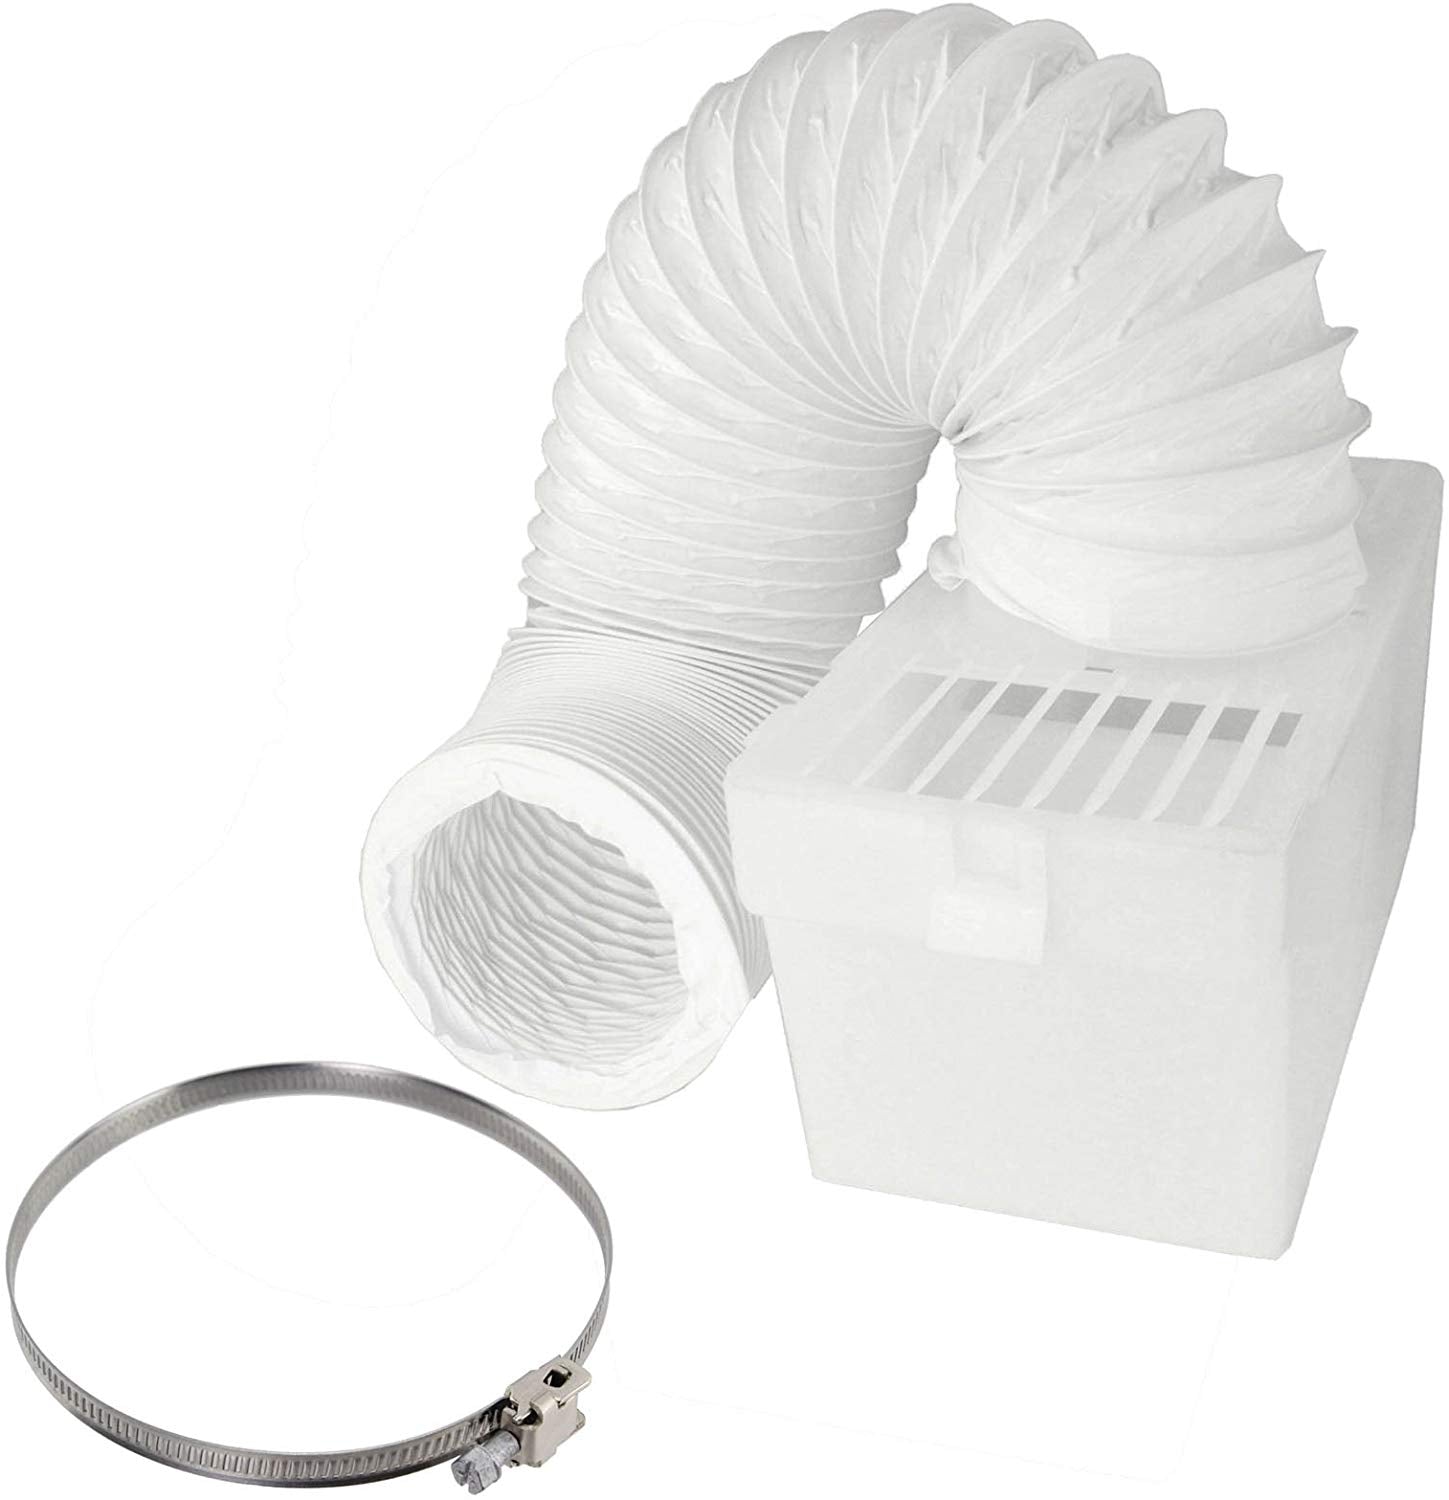 Condenser Vent Box & Hose Kit With Screw Clip for Tricity Bendix Vented Tumble Dryer (4" / 100mm Diameter)